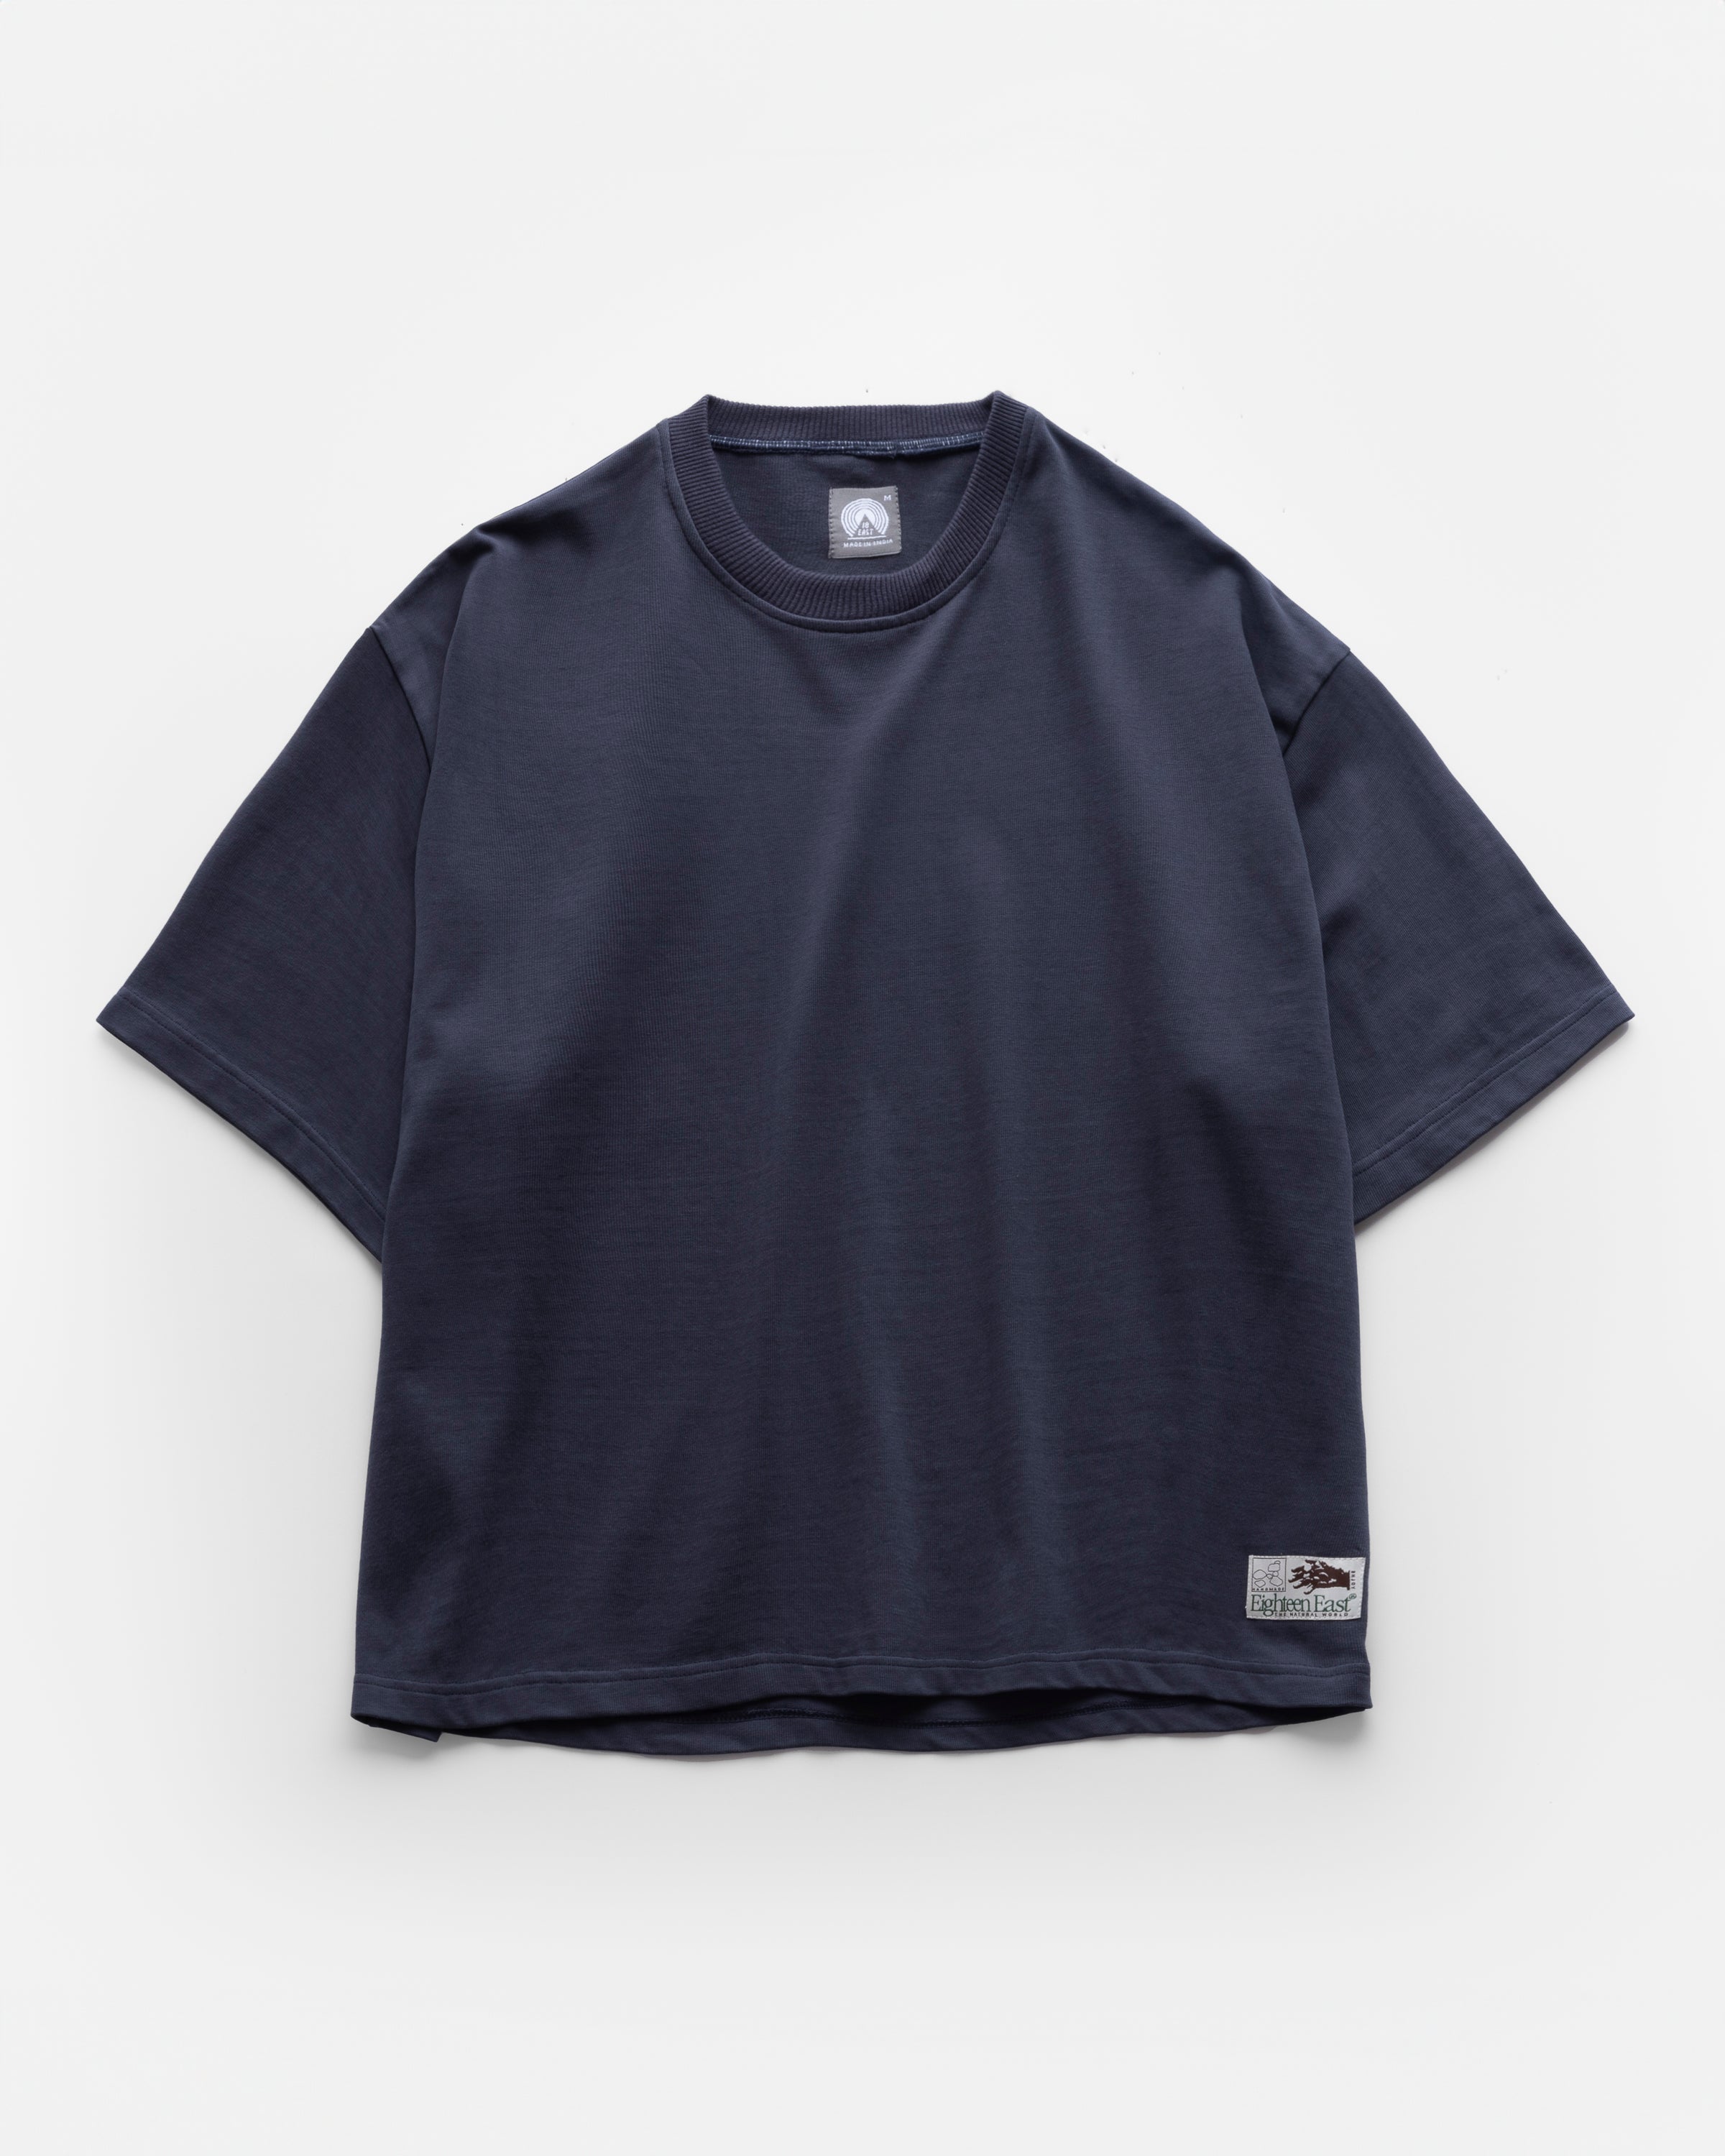 GRAHAME BIG TEE - WASHED NAVY HEAVYWEIGHT COTTON JERSEY